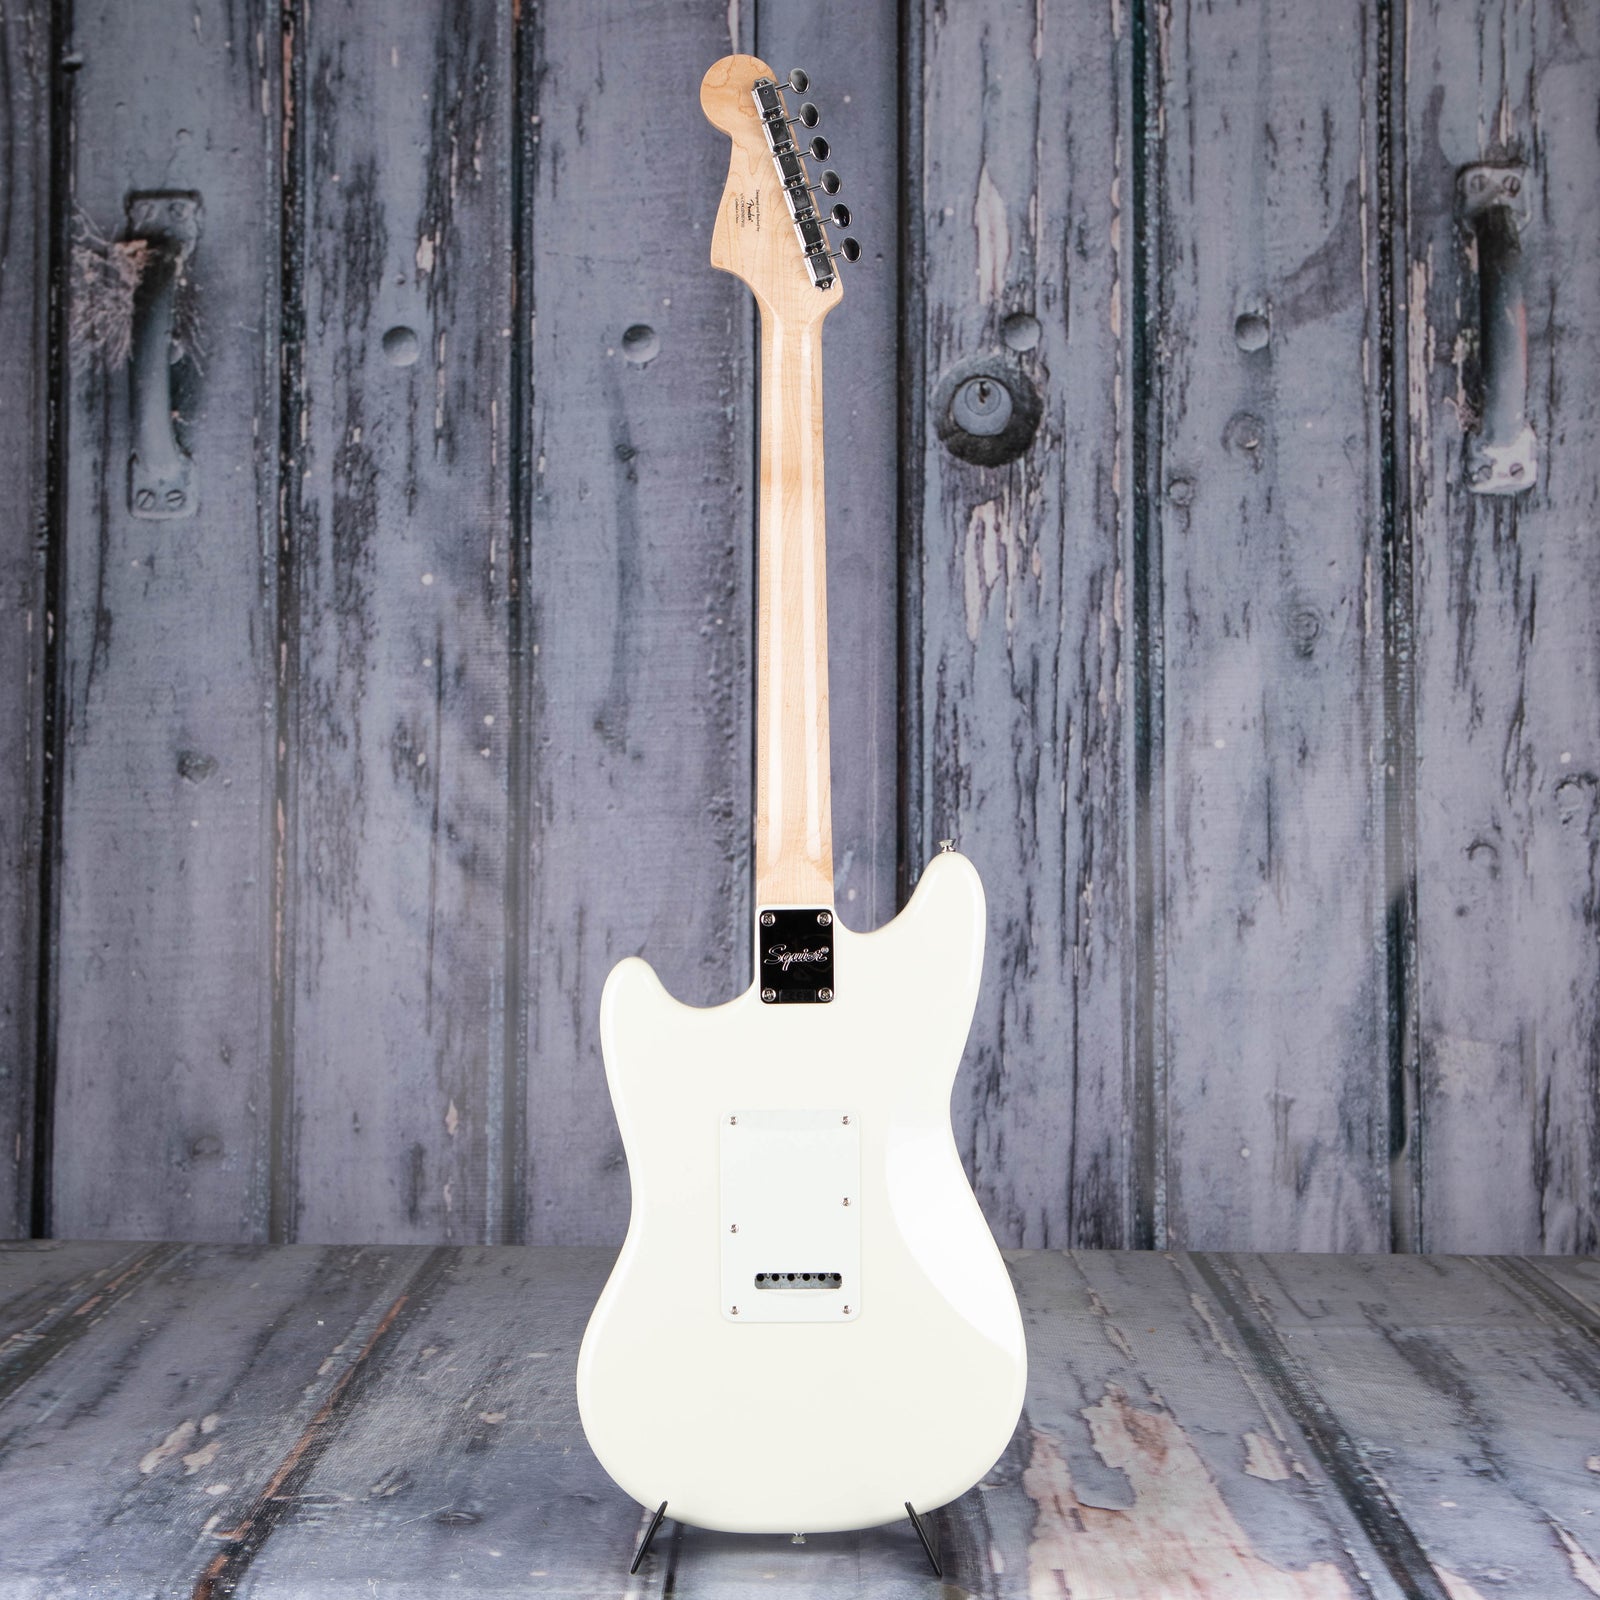 Squier Paranormal Cyclone, Pearl White | For Sale | Replay Guitar 